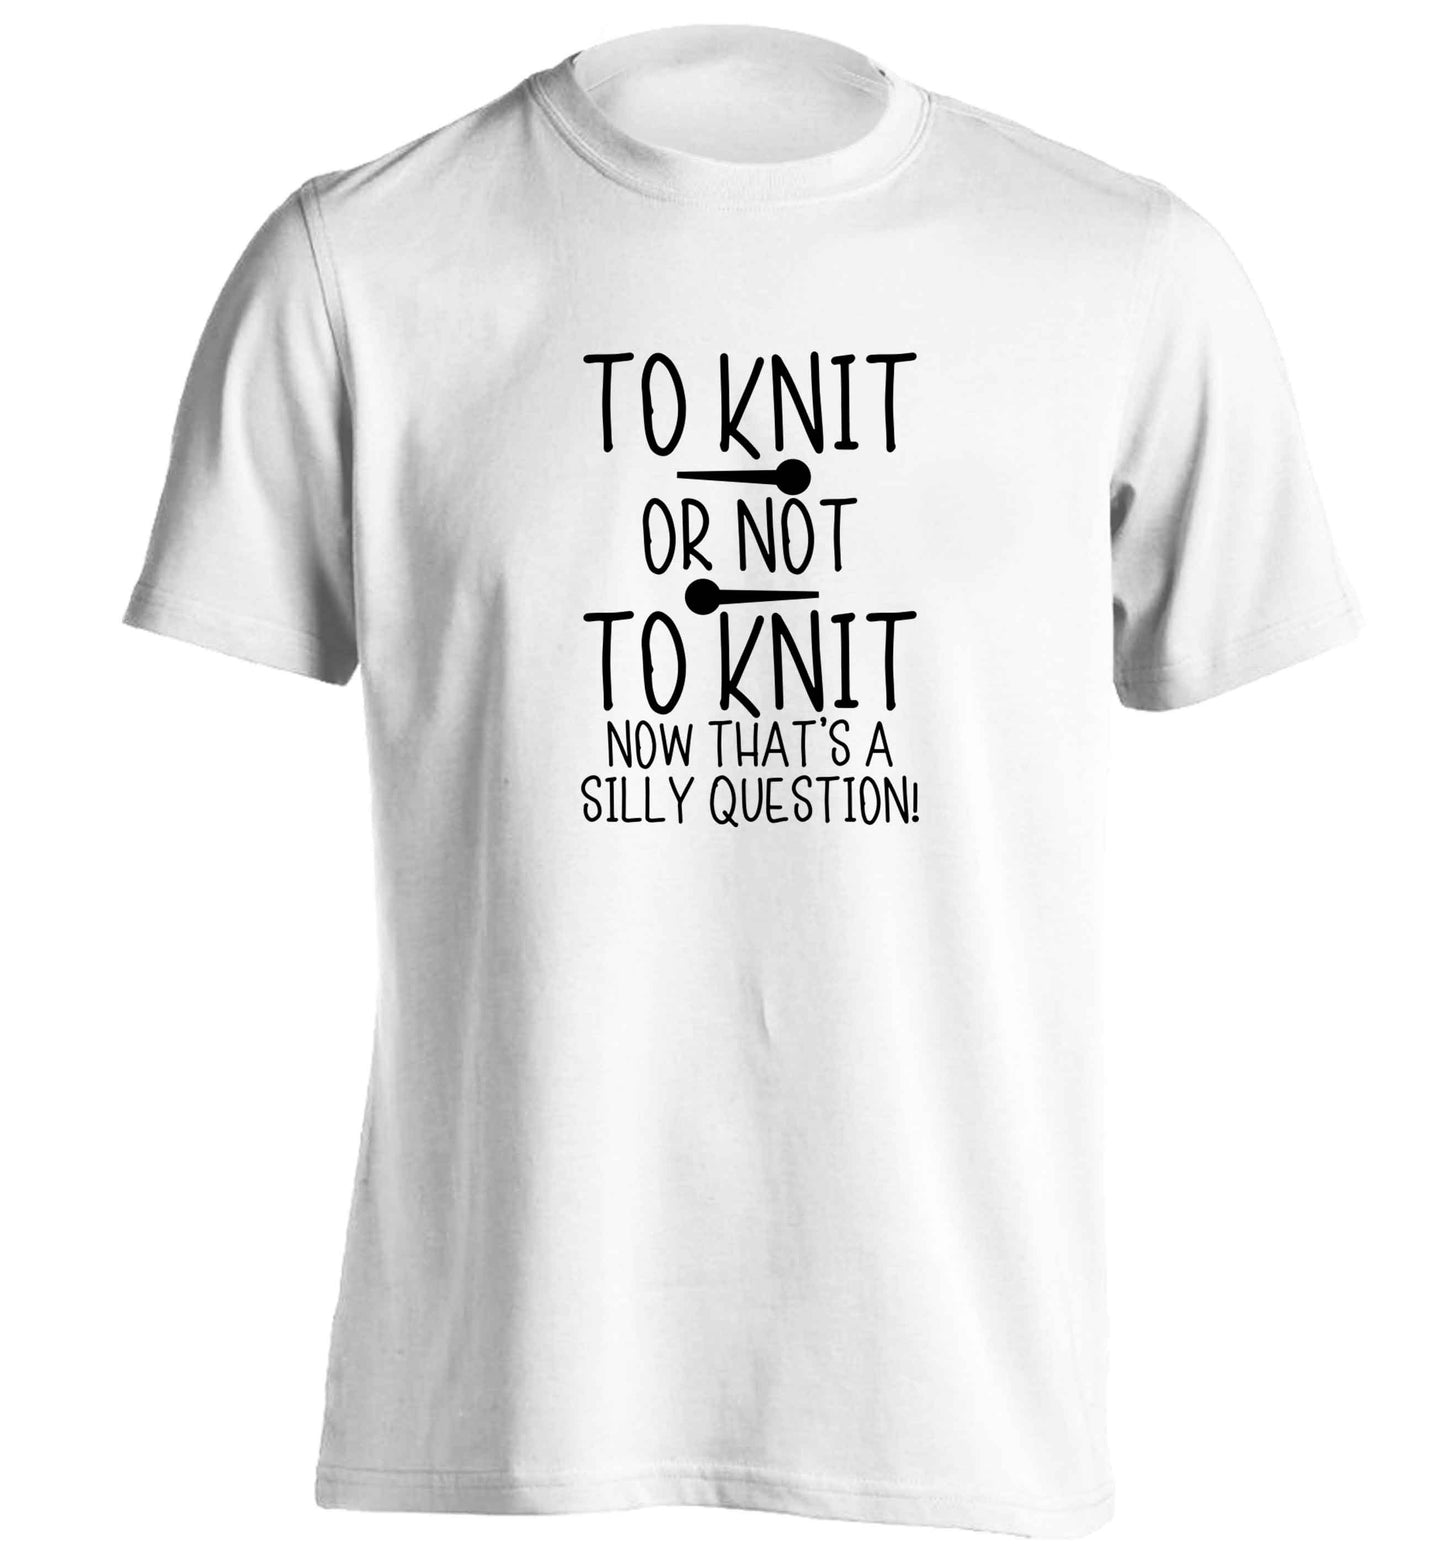 To knit or not to knit now that's a silly question adults unisex white Tshirt 2XL